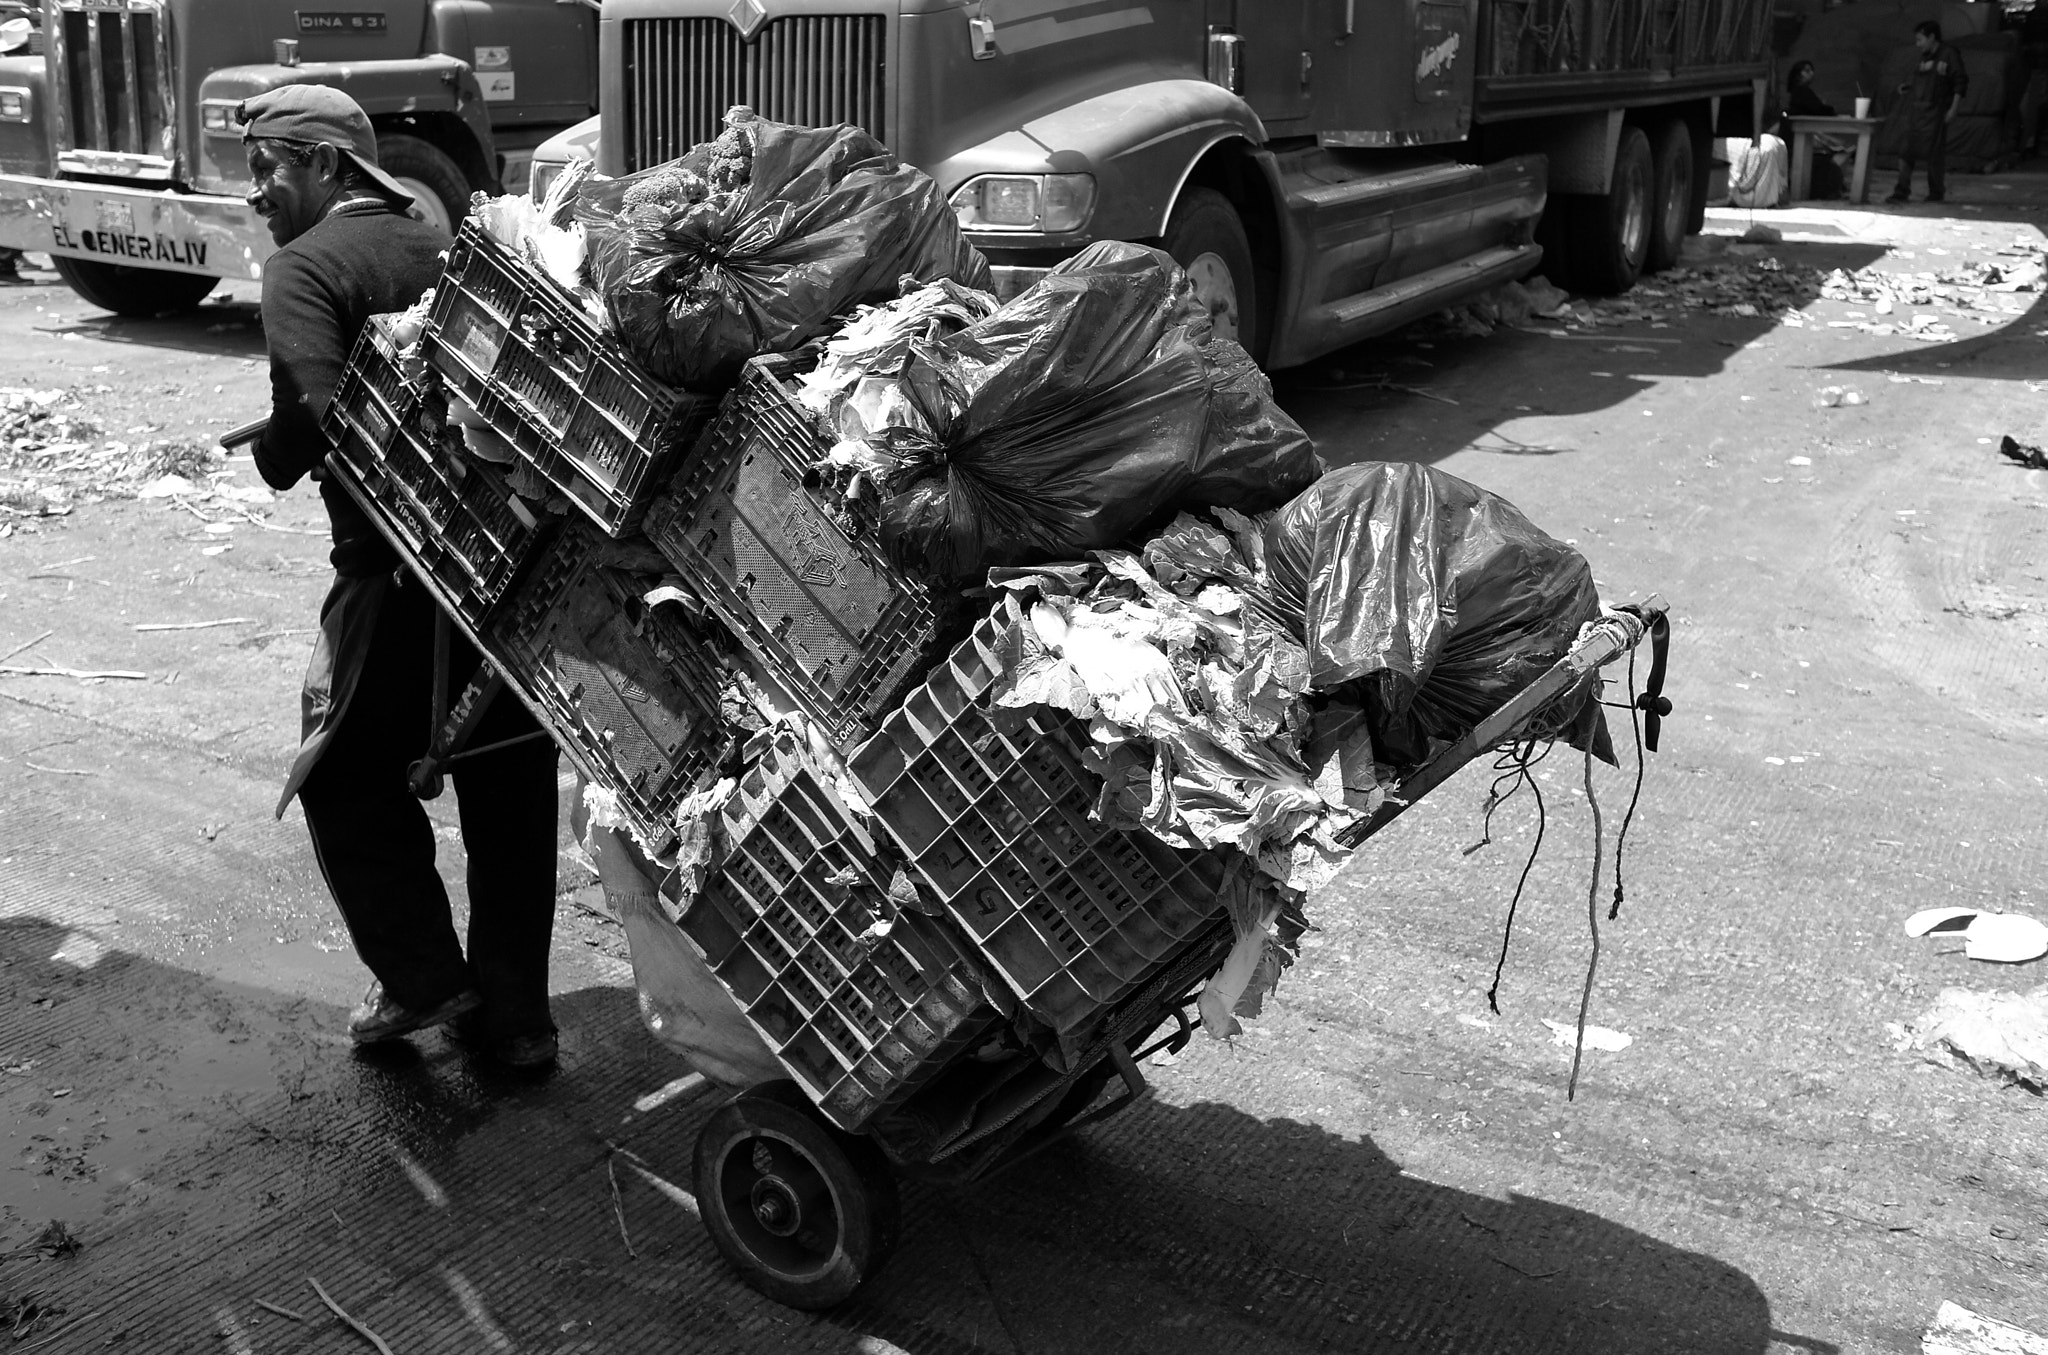 Leica X2 sample photo. Man carrying the garbage photography